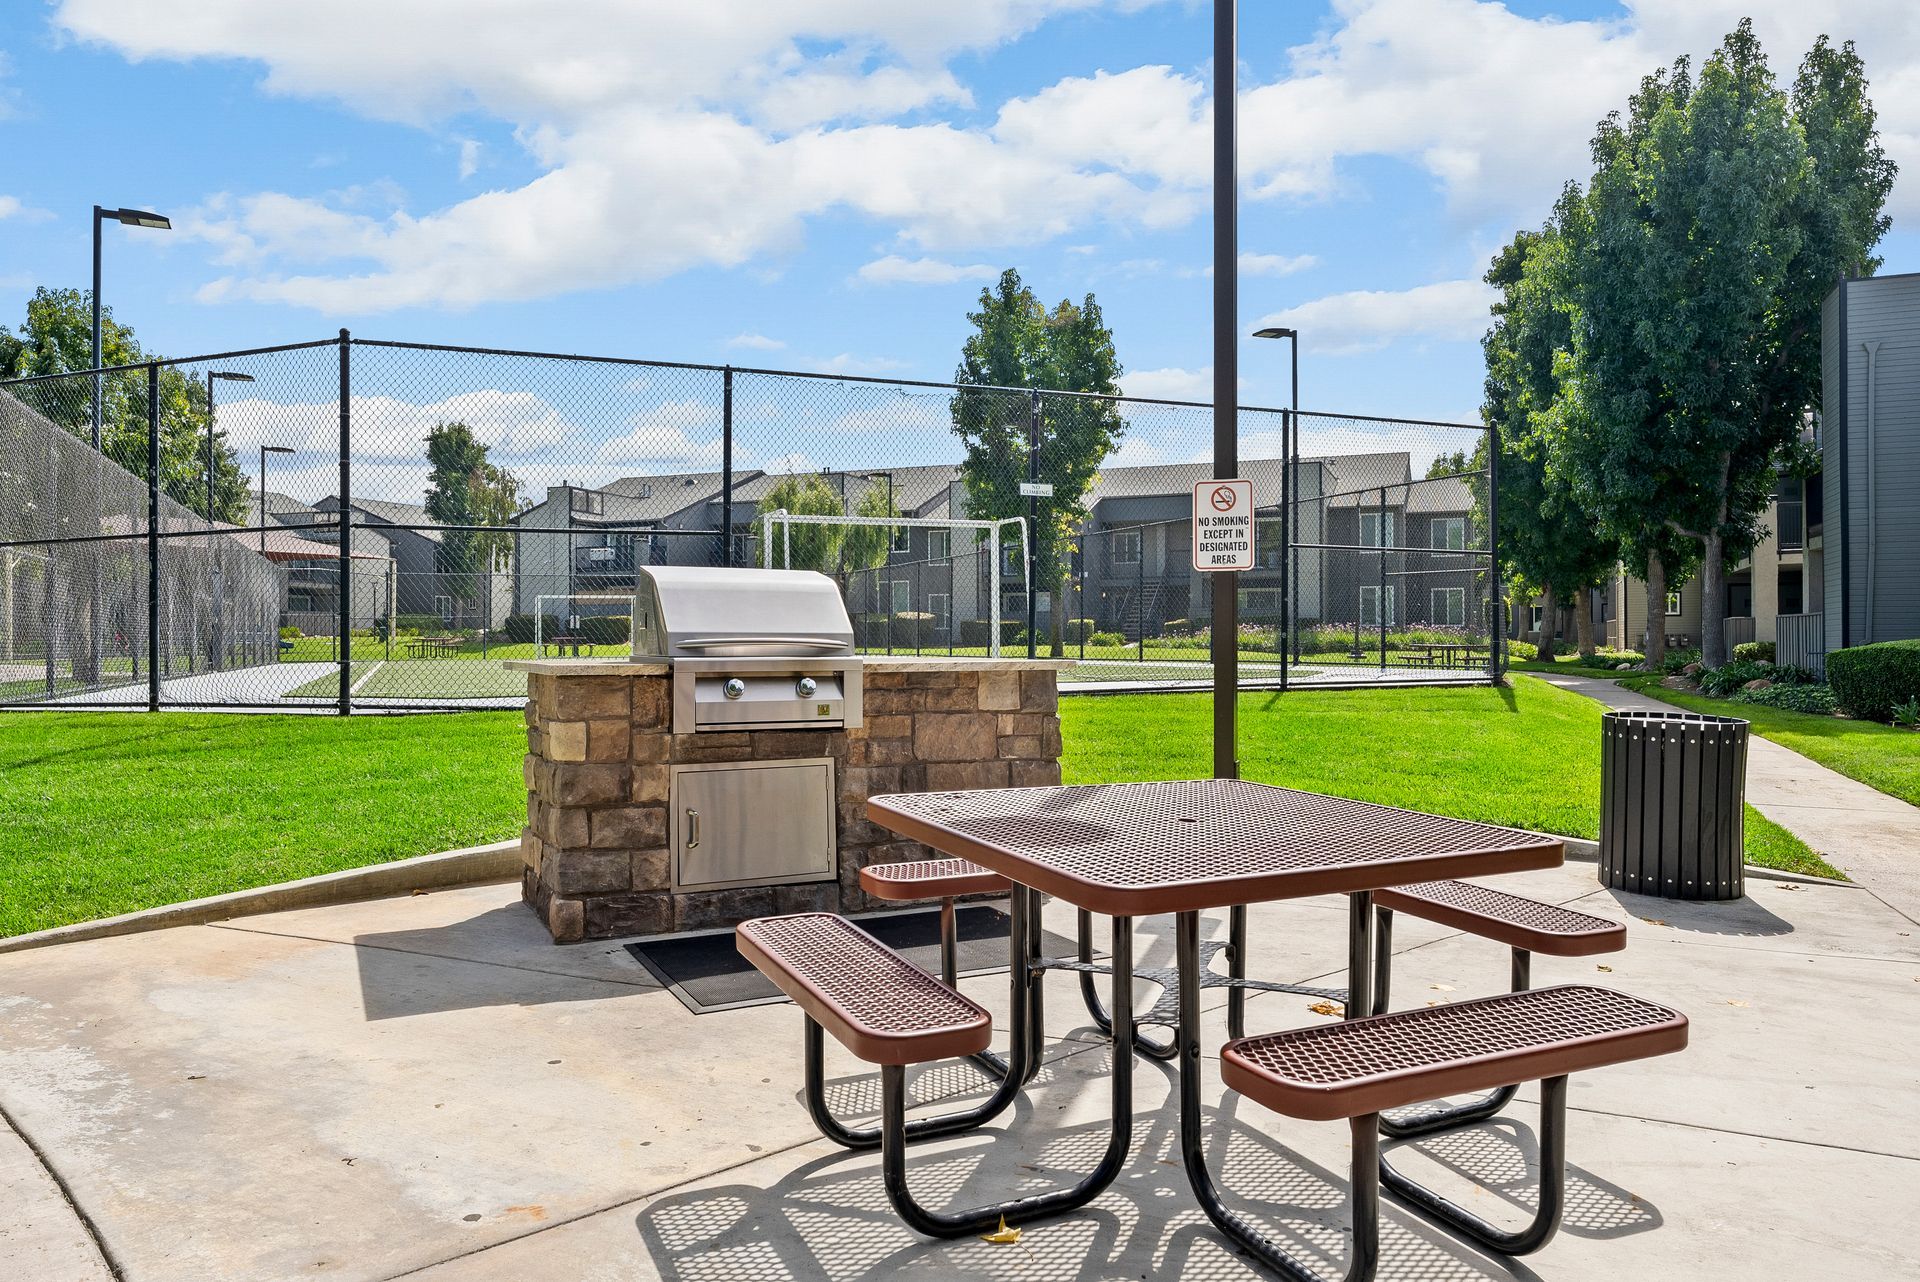 A picnic table with benches and a grill in a park.